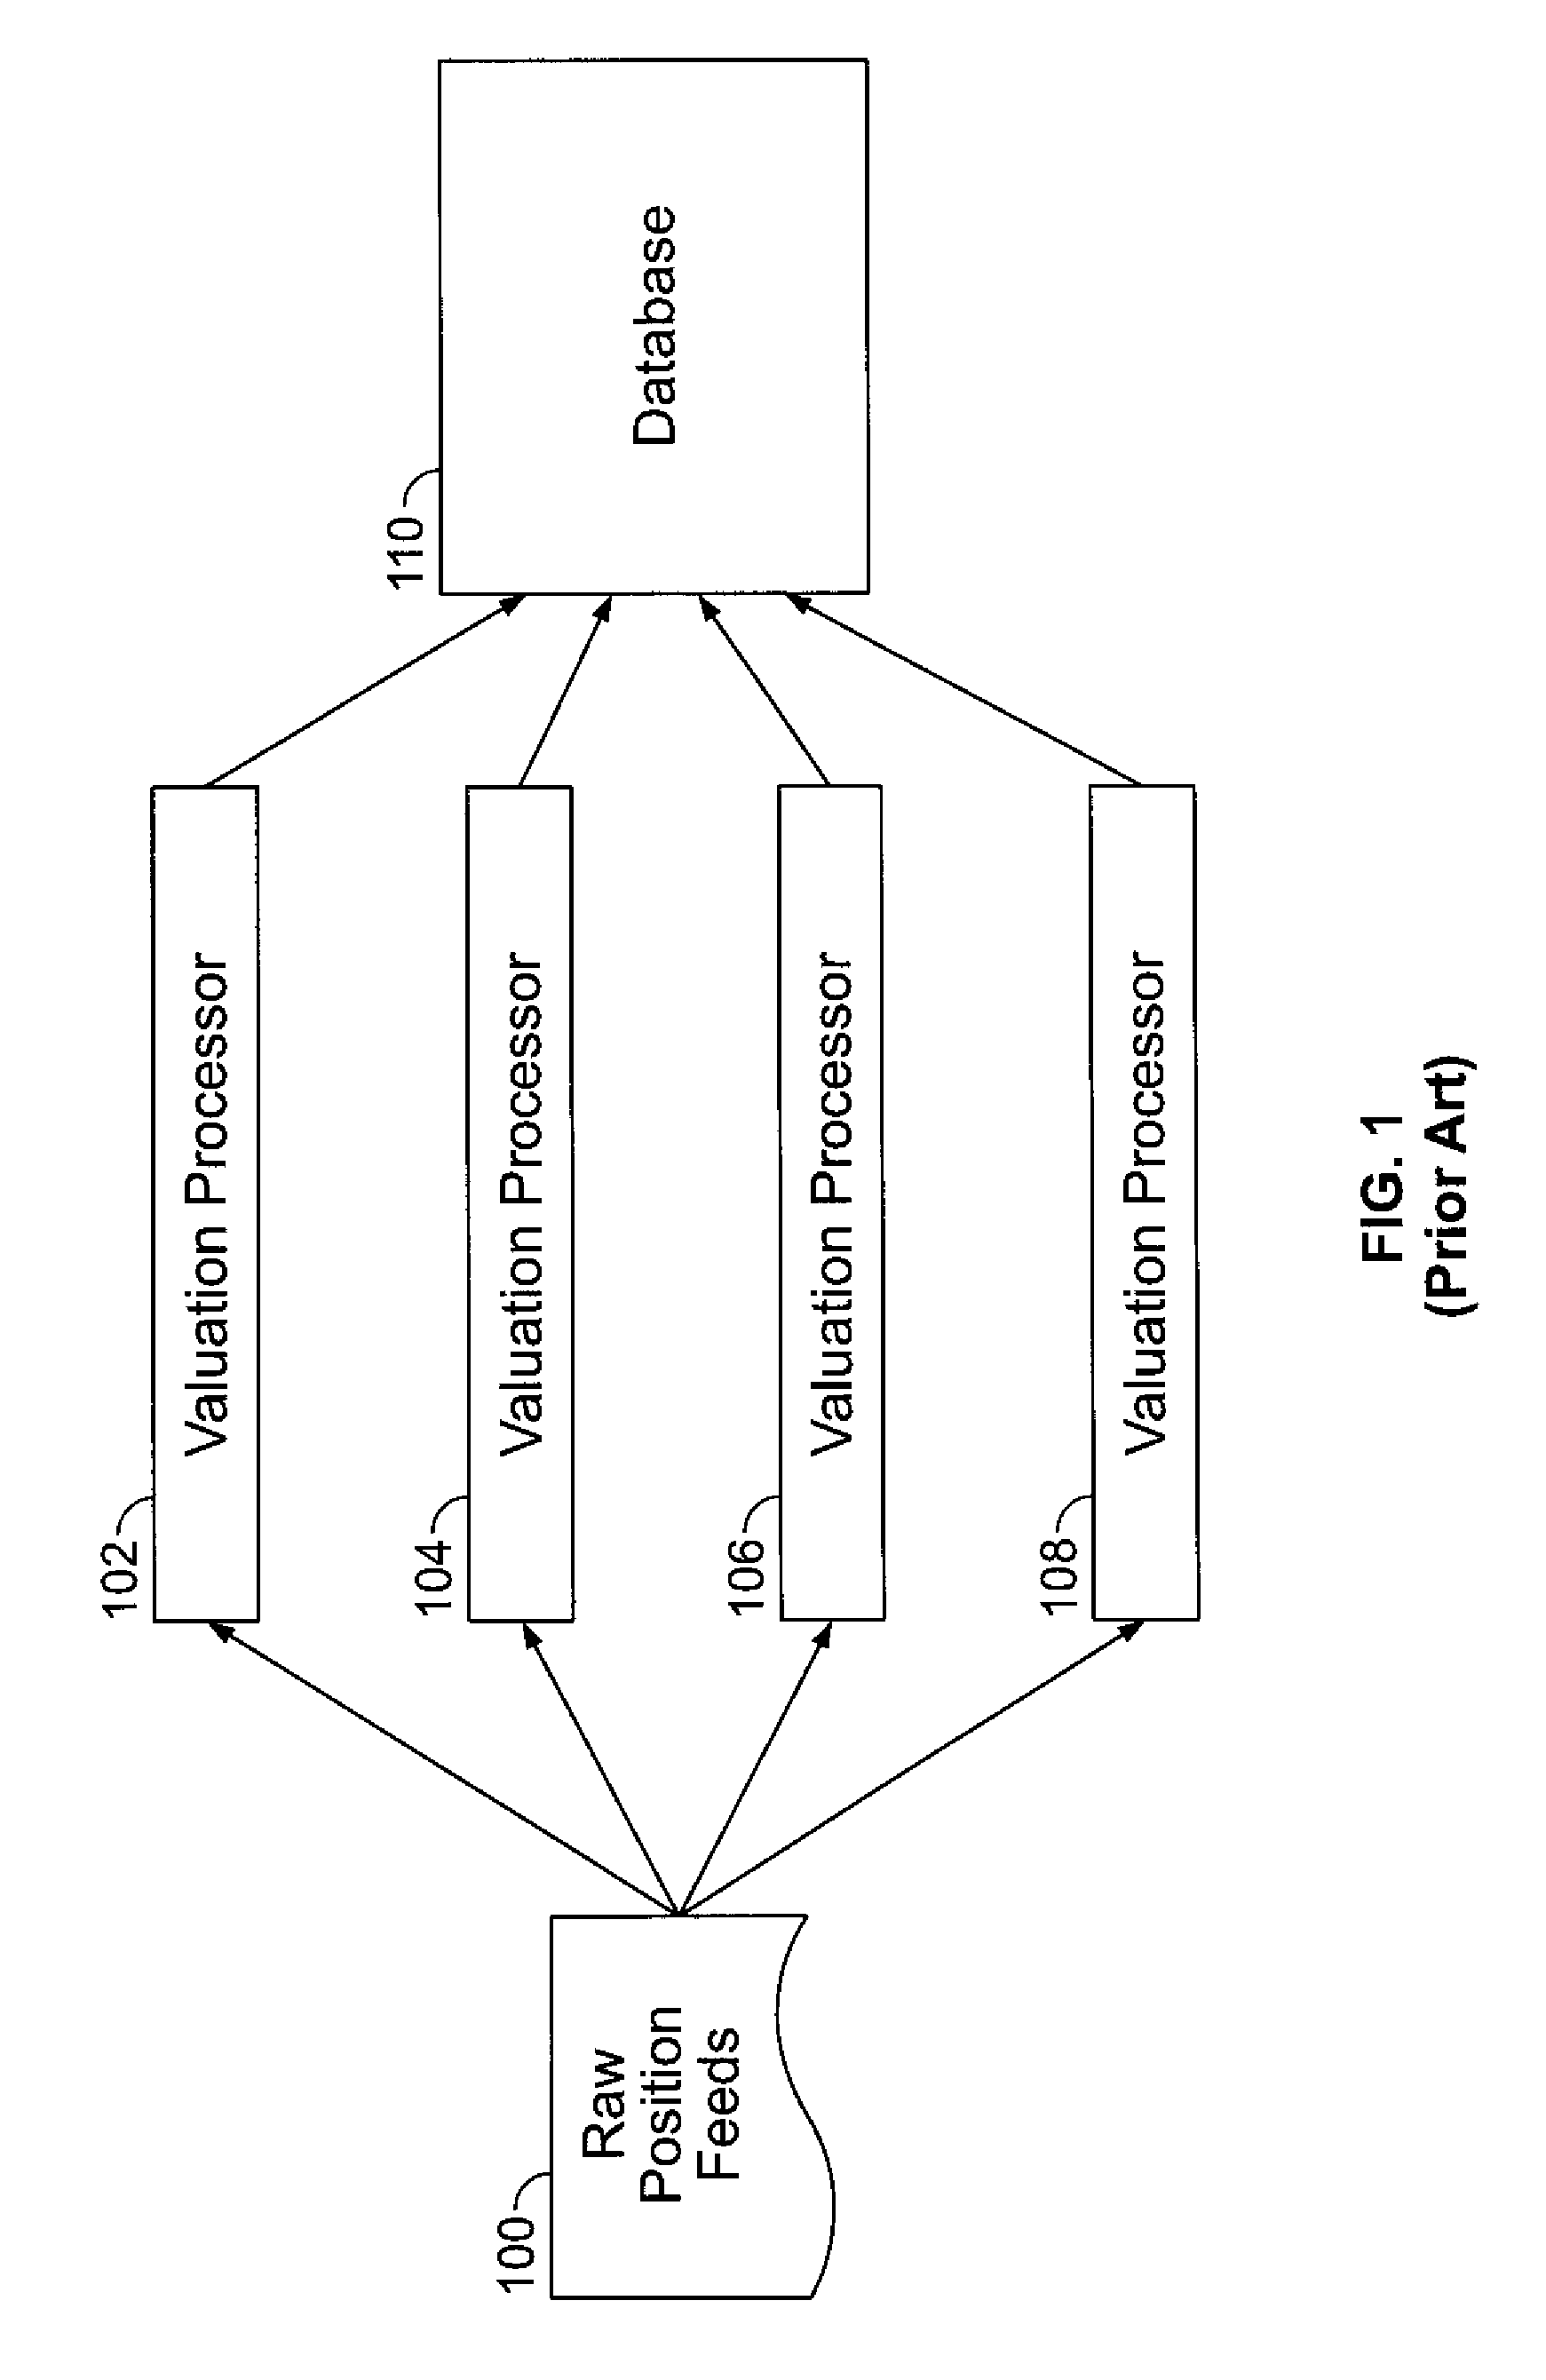 System and method for multi-dimensional risk analysis